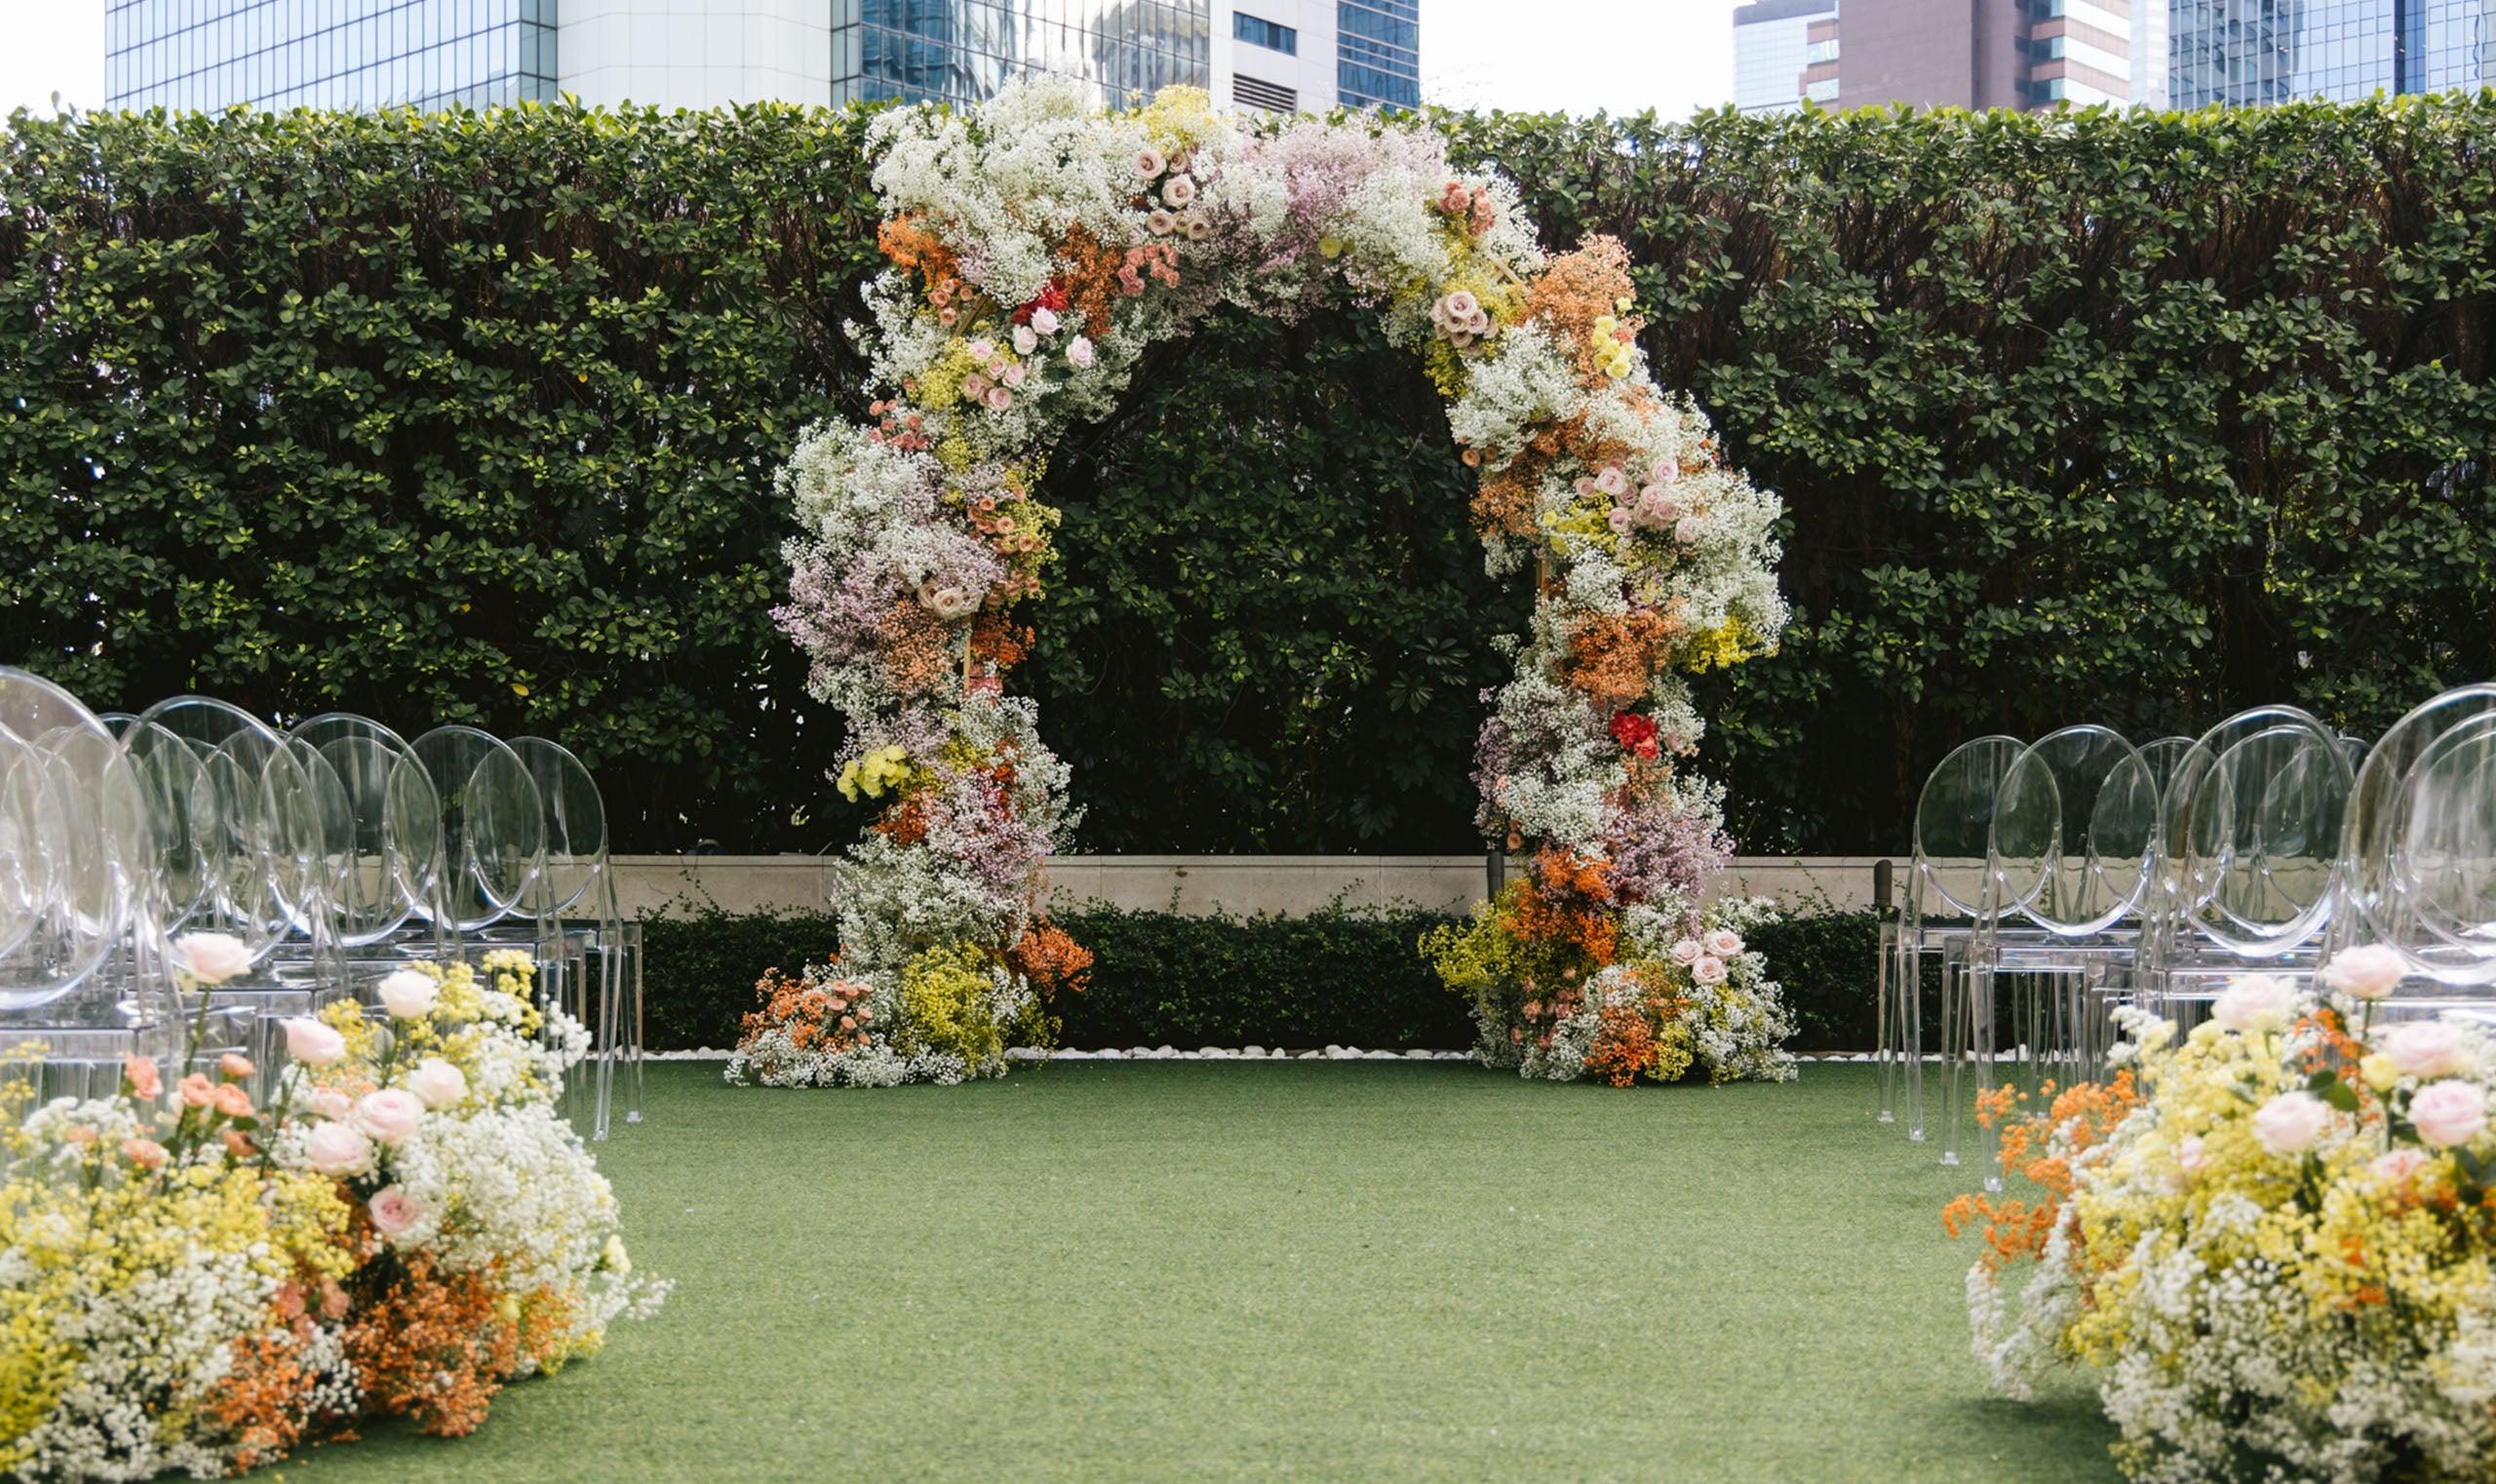 Wedding Ceremony at The Upper House Lawn - Ellermann Flowers